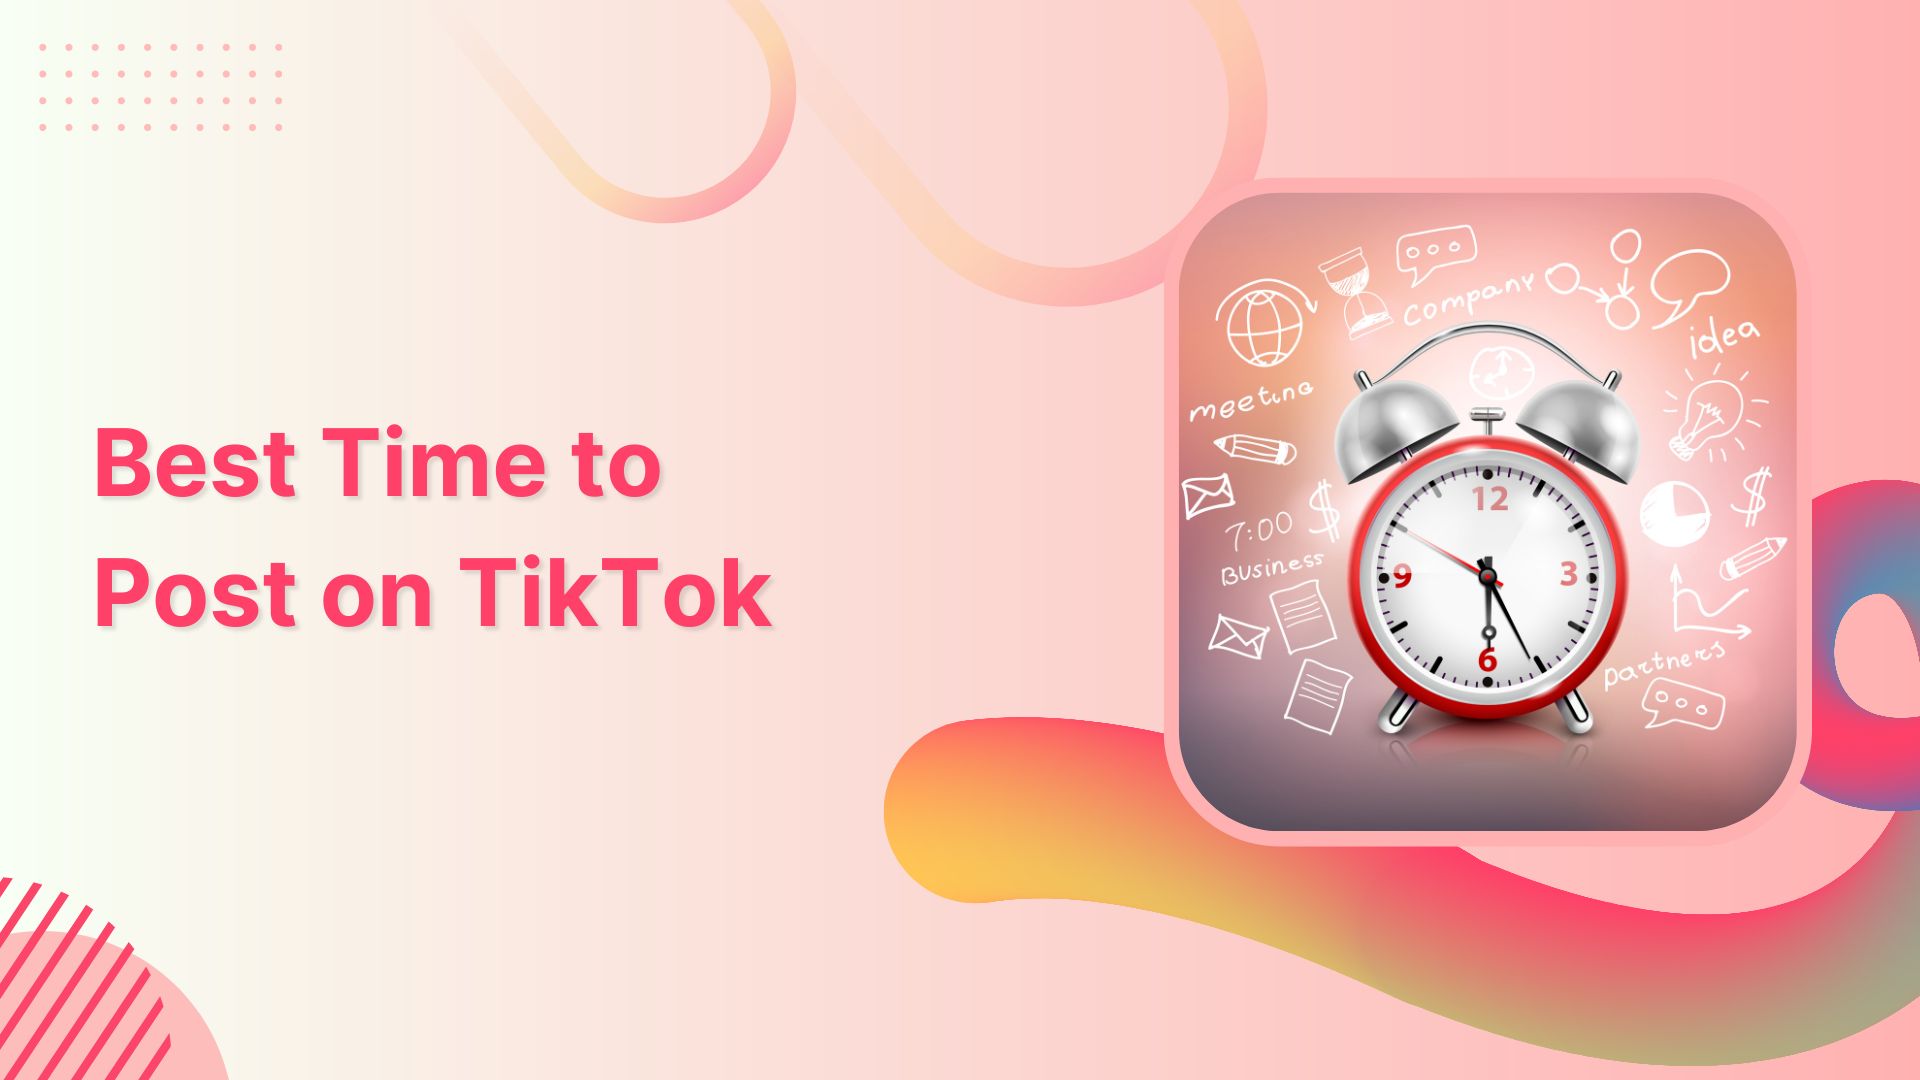 What is Best Time to Post On TikTok? 